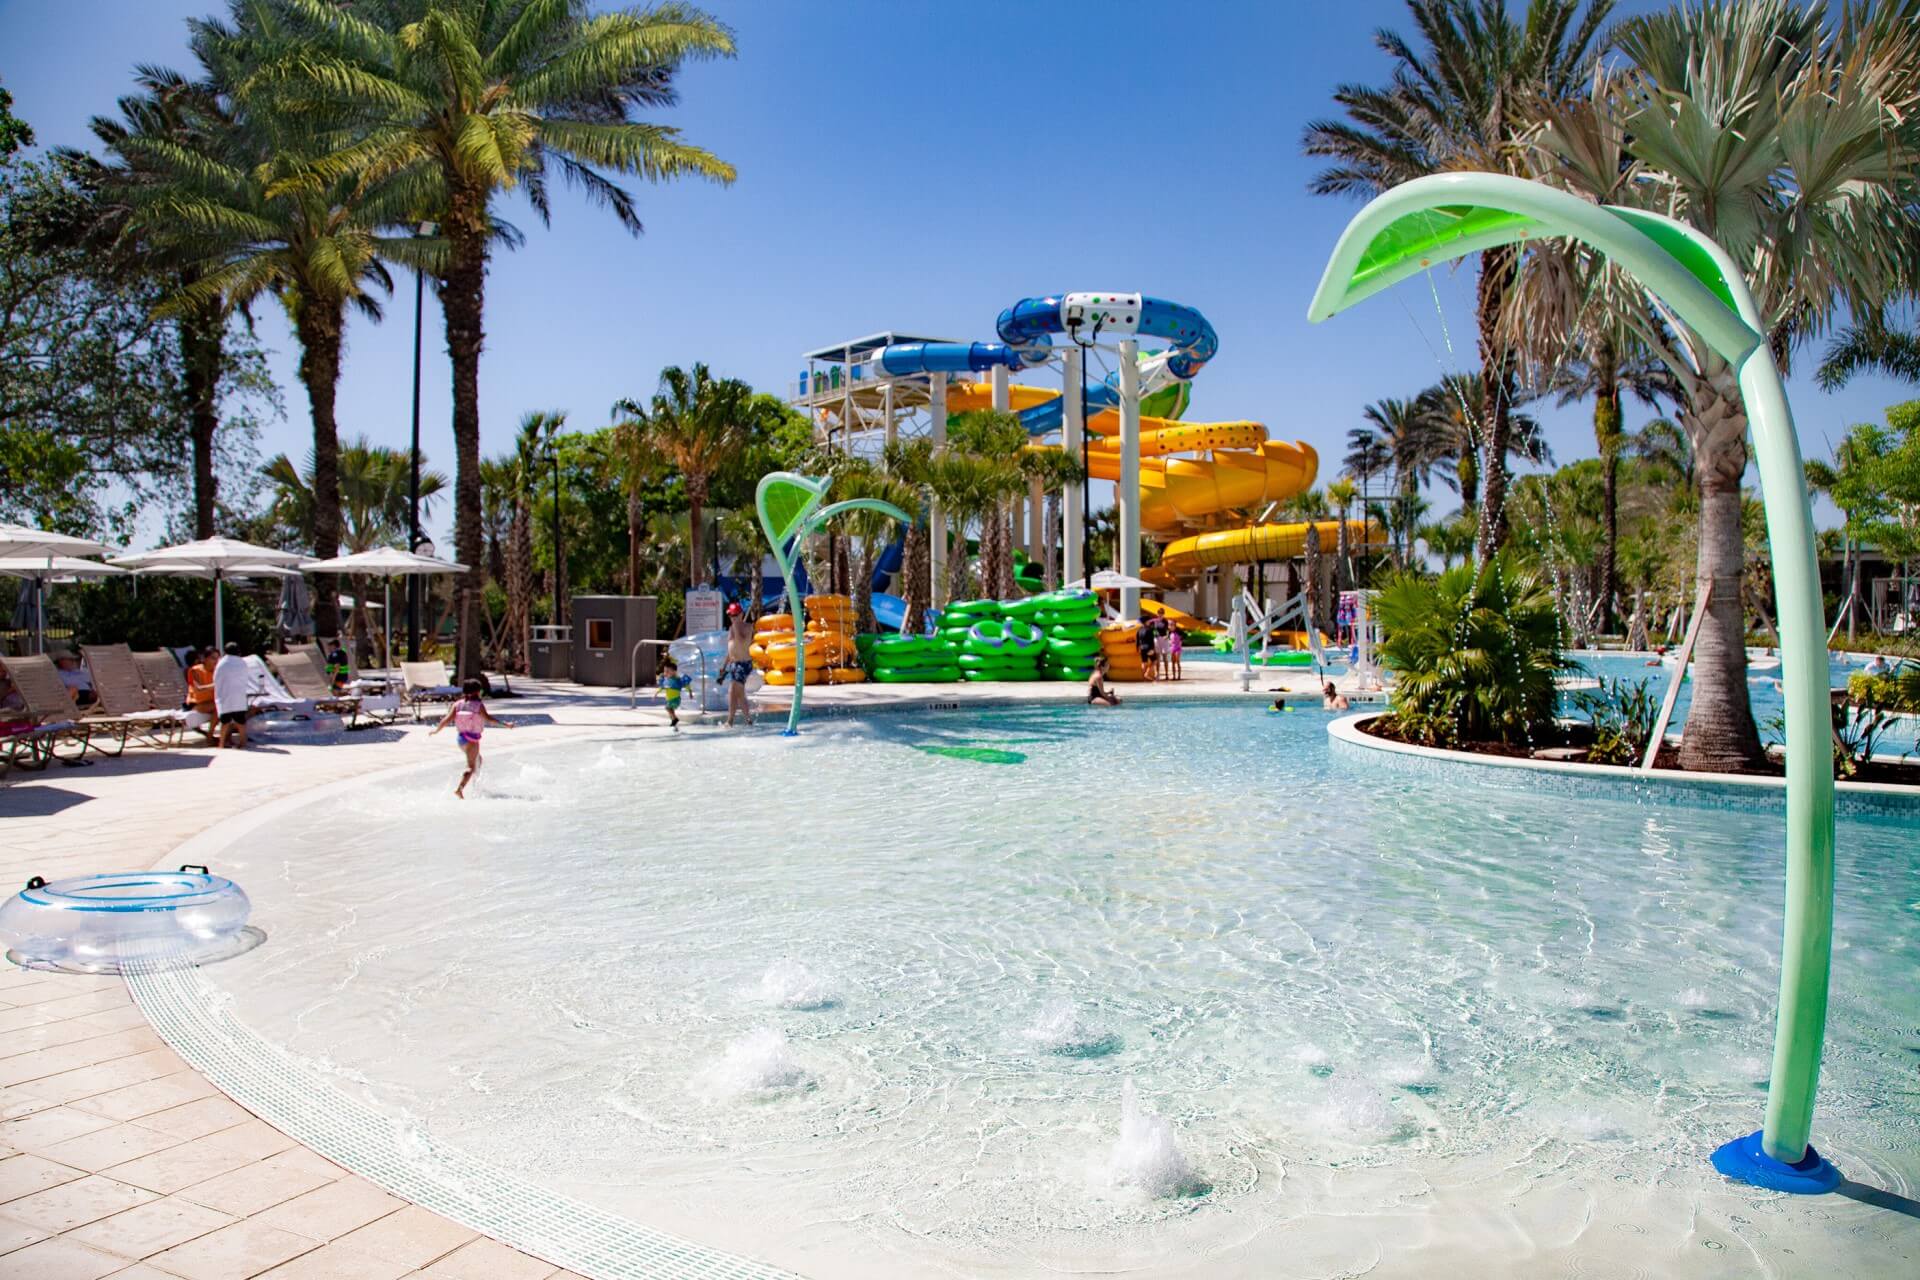 River Falls Waterpark at Orlando World Center Marriott's zero-entry pool with bubbling nozzles and spraying vertical leaf elements